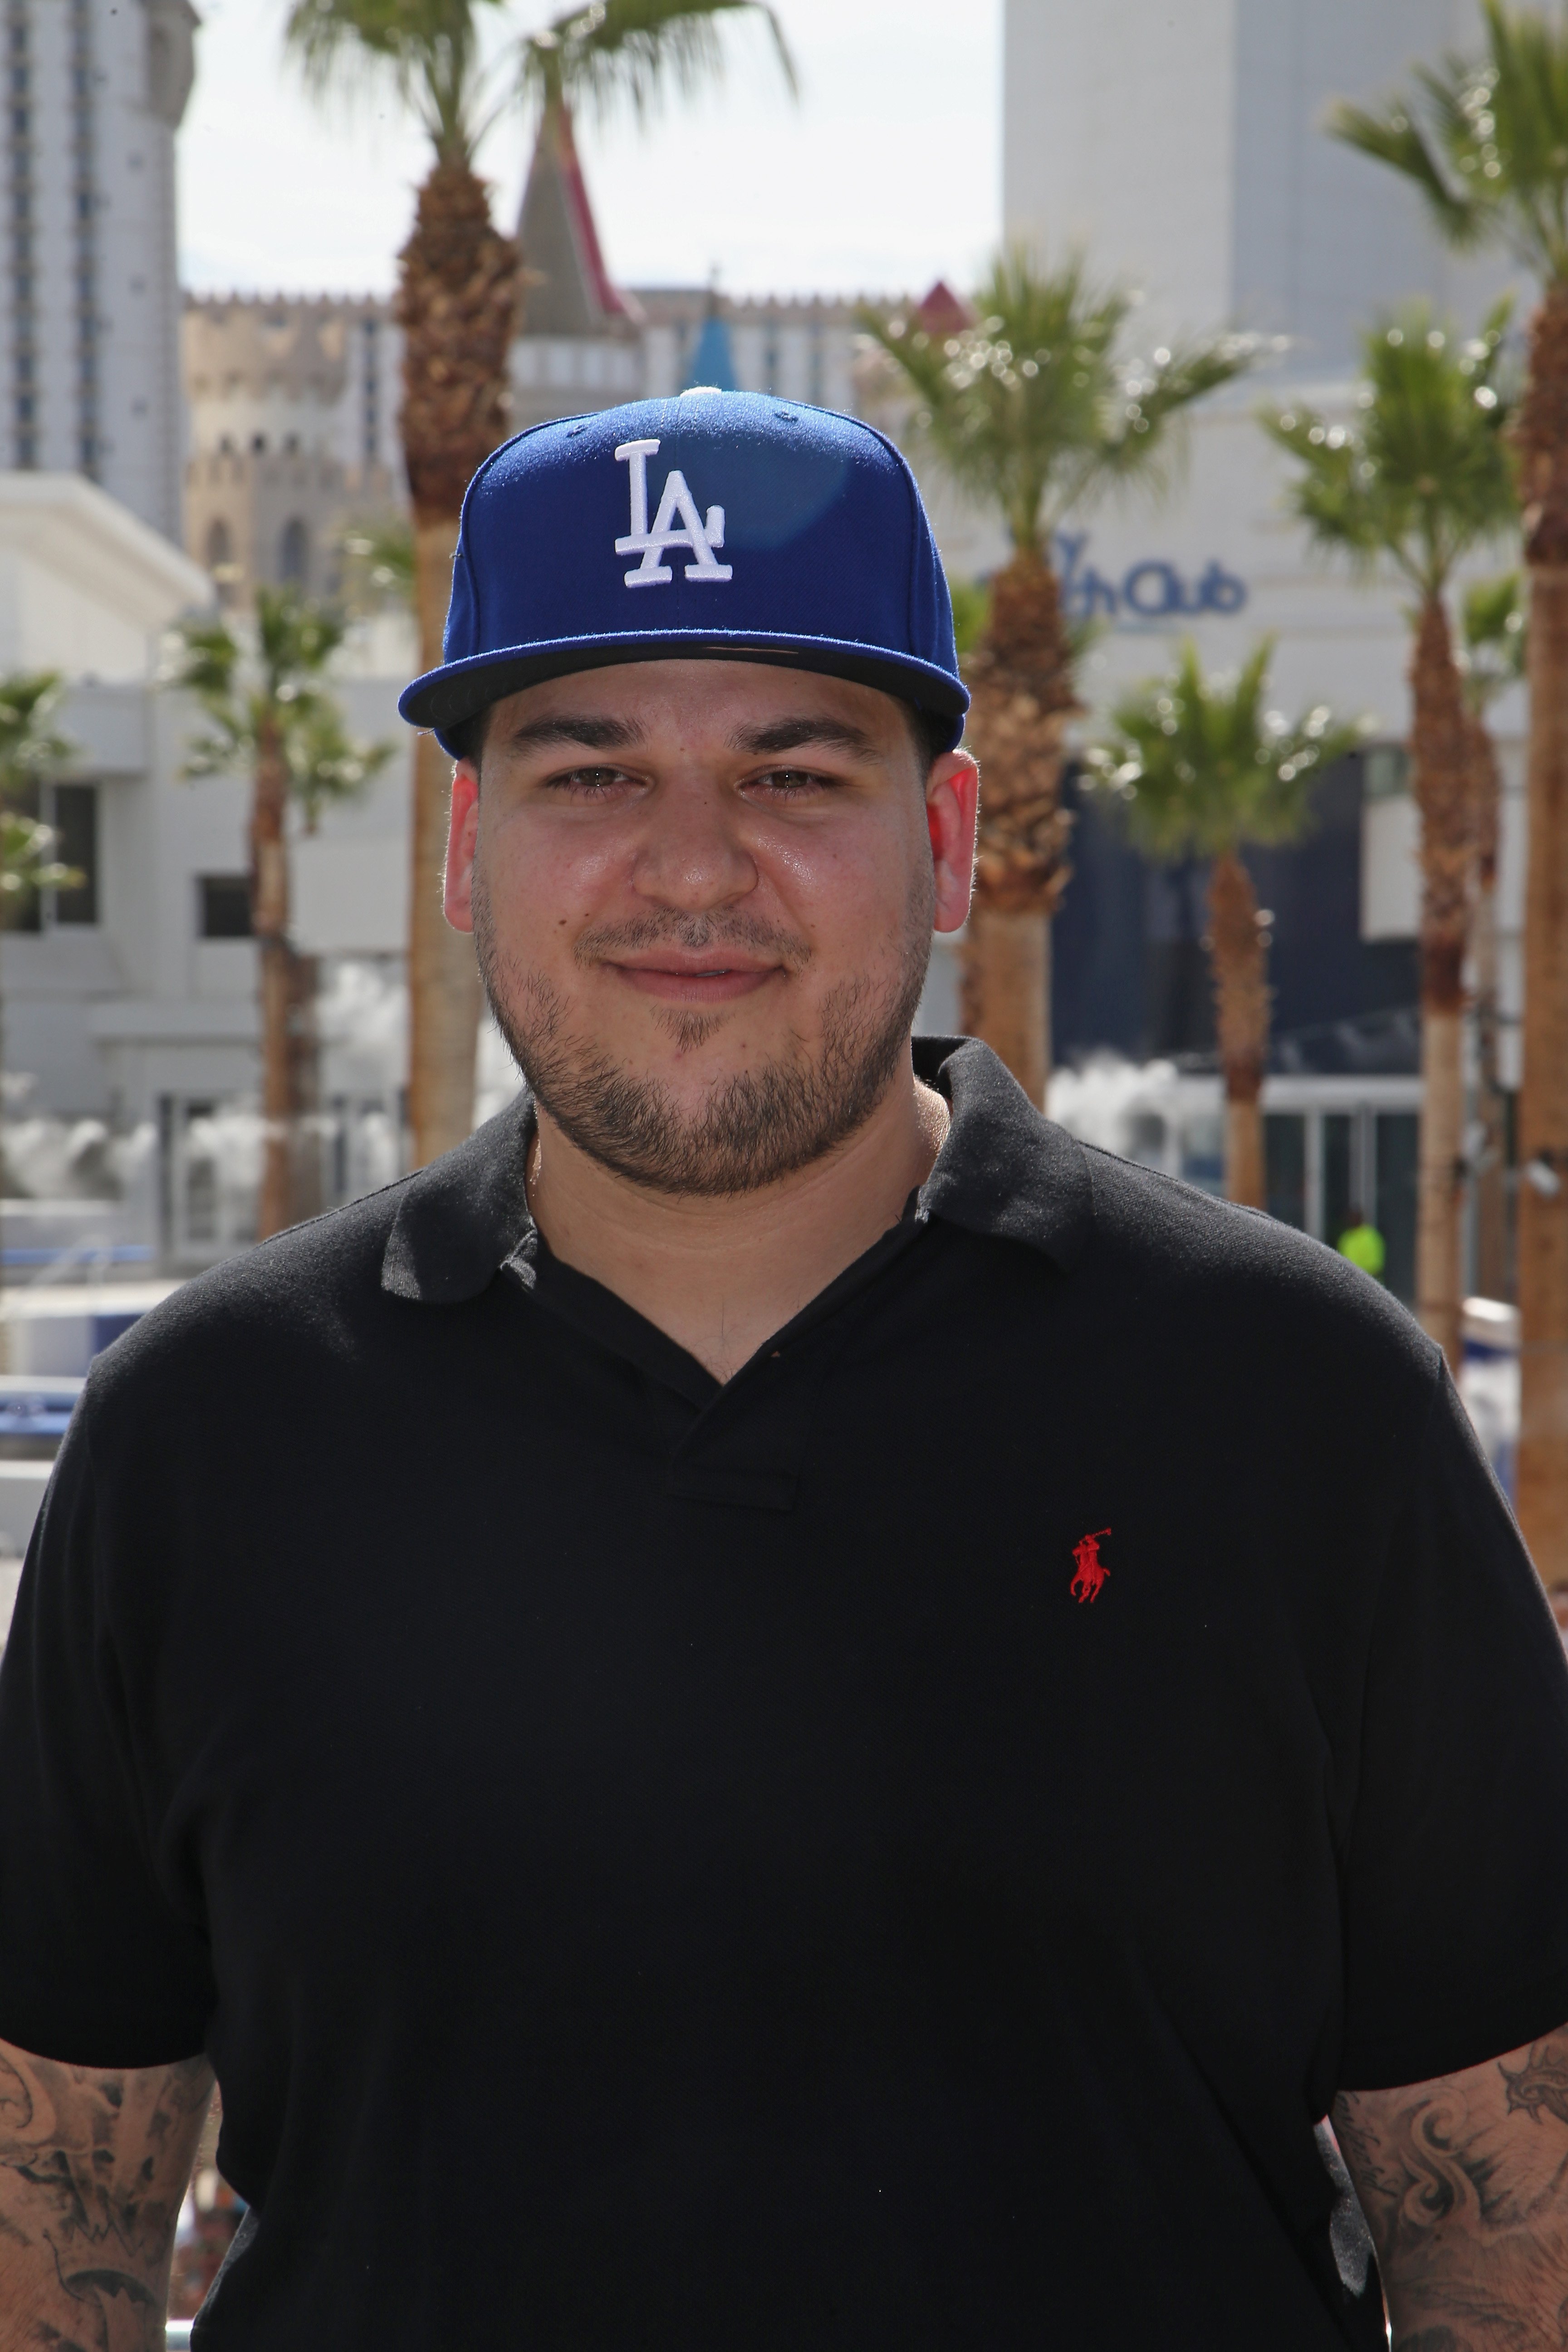 Rob Kardashian attends an event at a beach club | Source: Getty Images/GlobalImagesUkraine